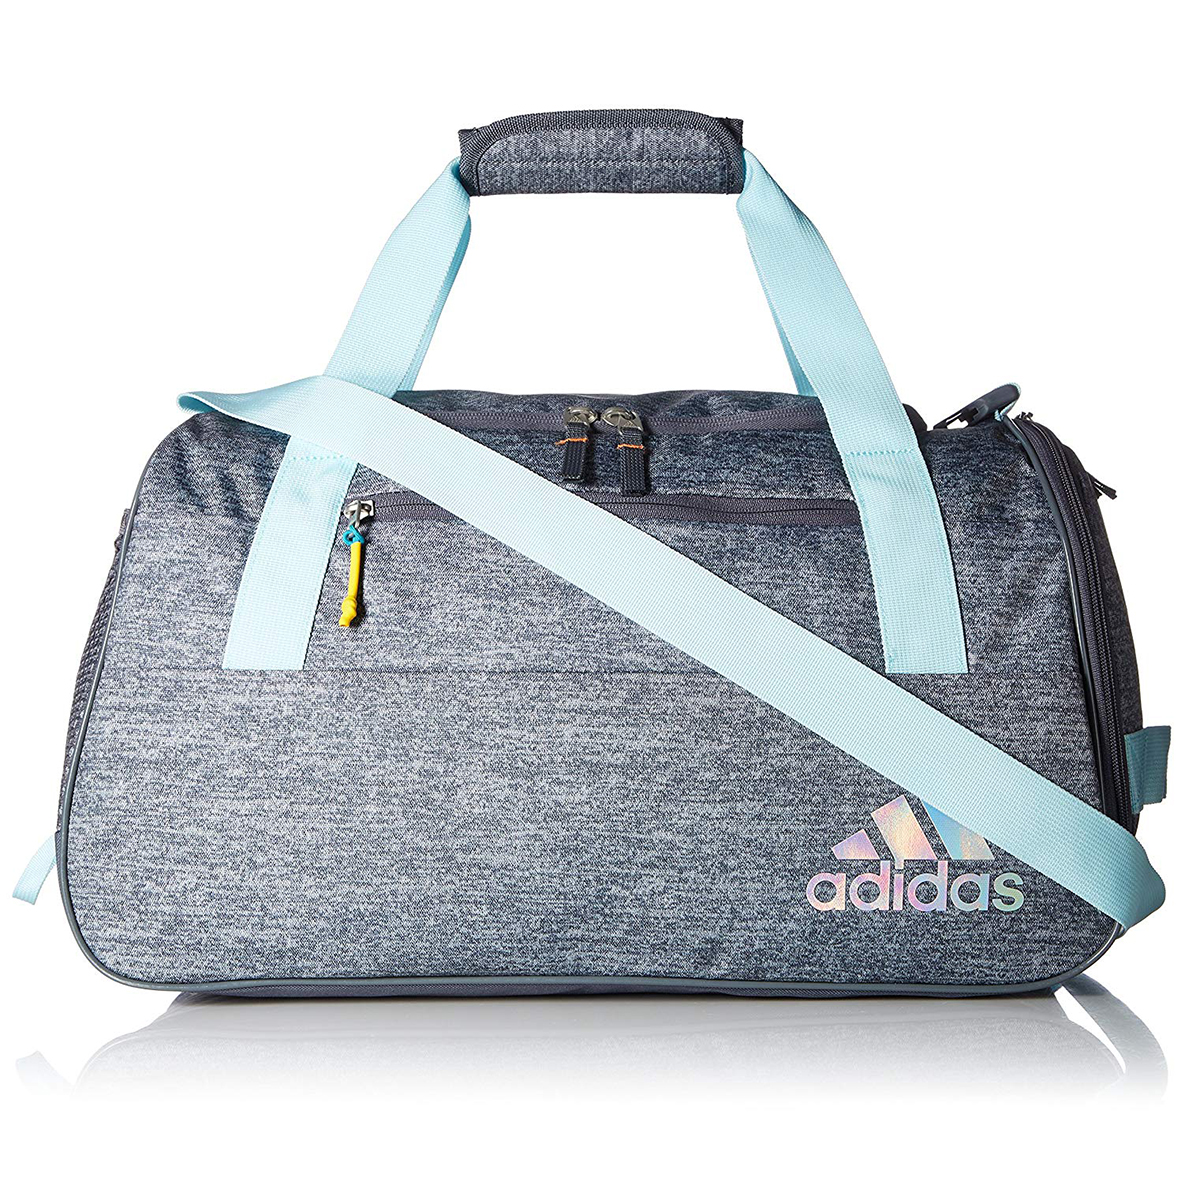 This Adidas Gym Bag Is So Cute You’ll Want to Carry It Everywhere